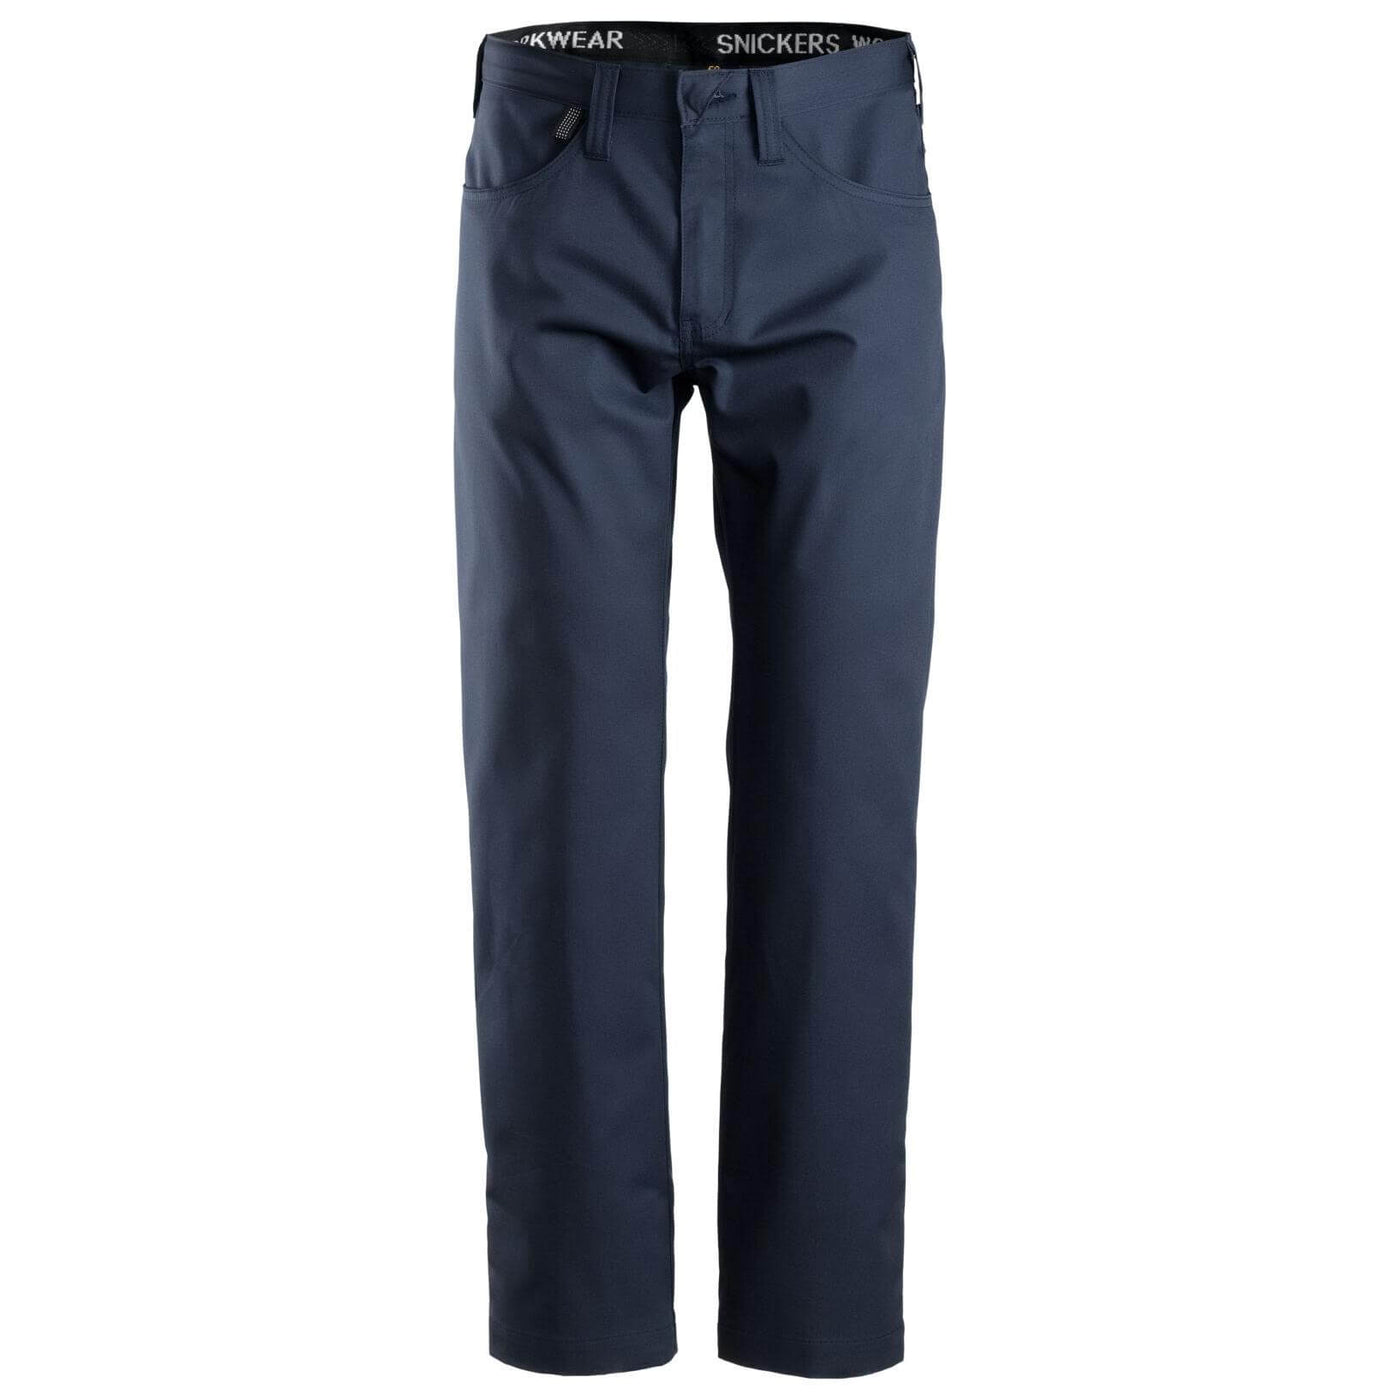 Snickers 6400 Service Chinos Navy